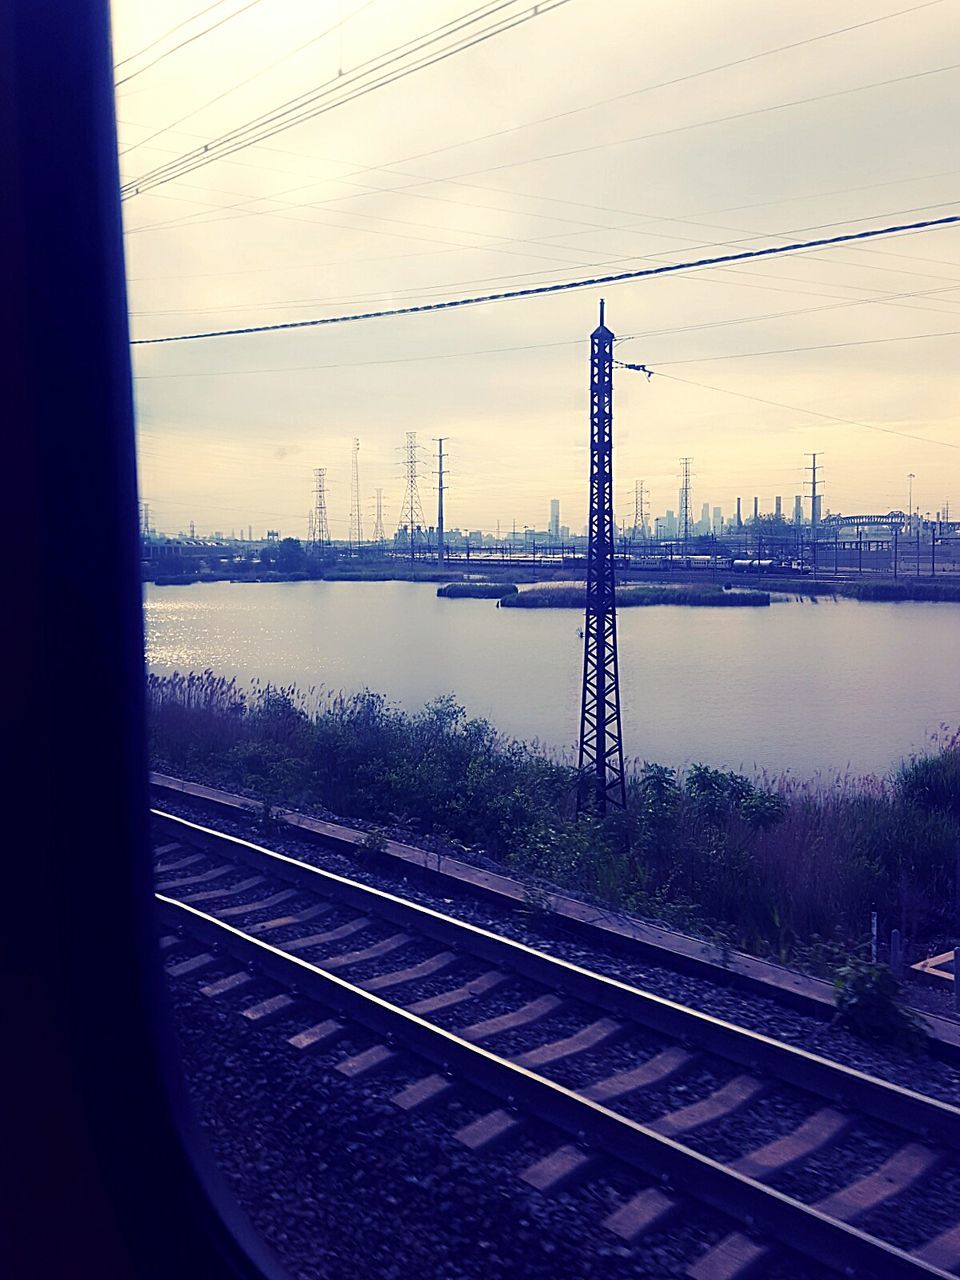 VIEW OF RAILWAY TRACKS AGAINST CLOUDY SKY